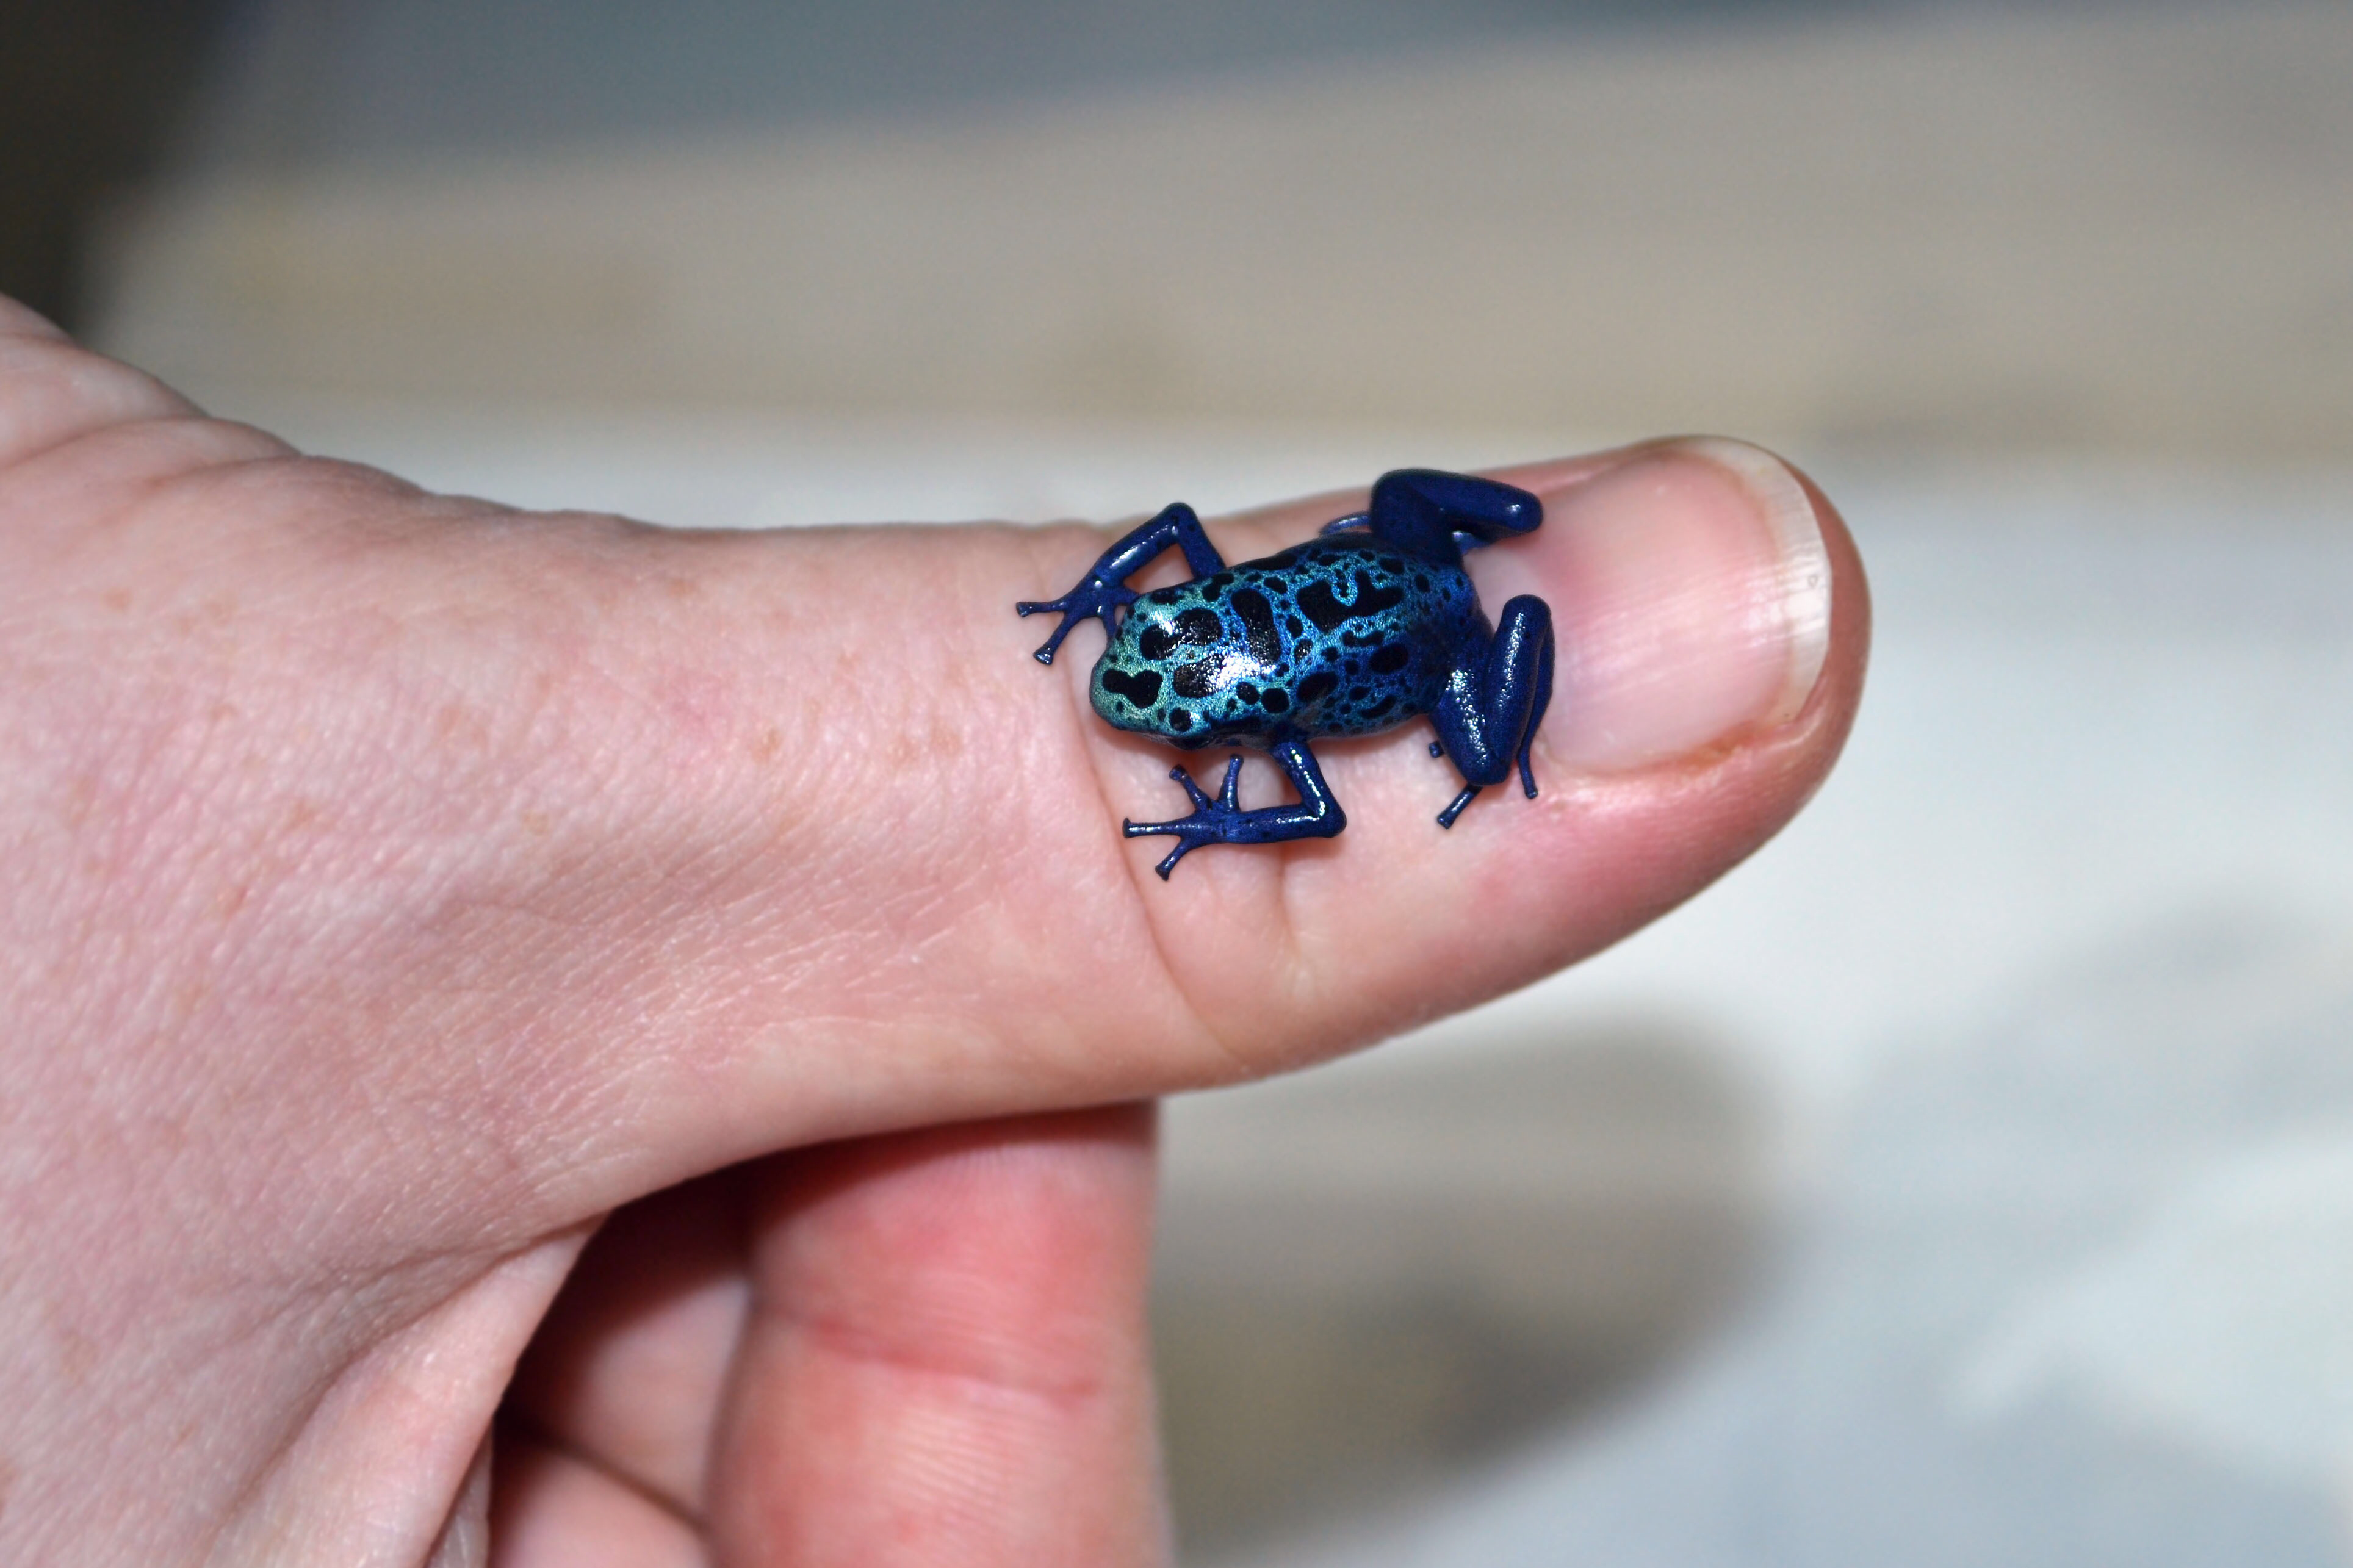 Tiny blue poison dart frog. An excellent idea for a mini-tattoo ...